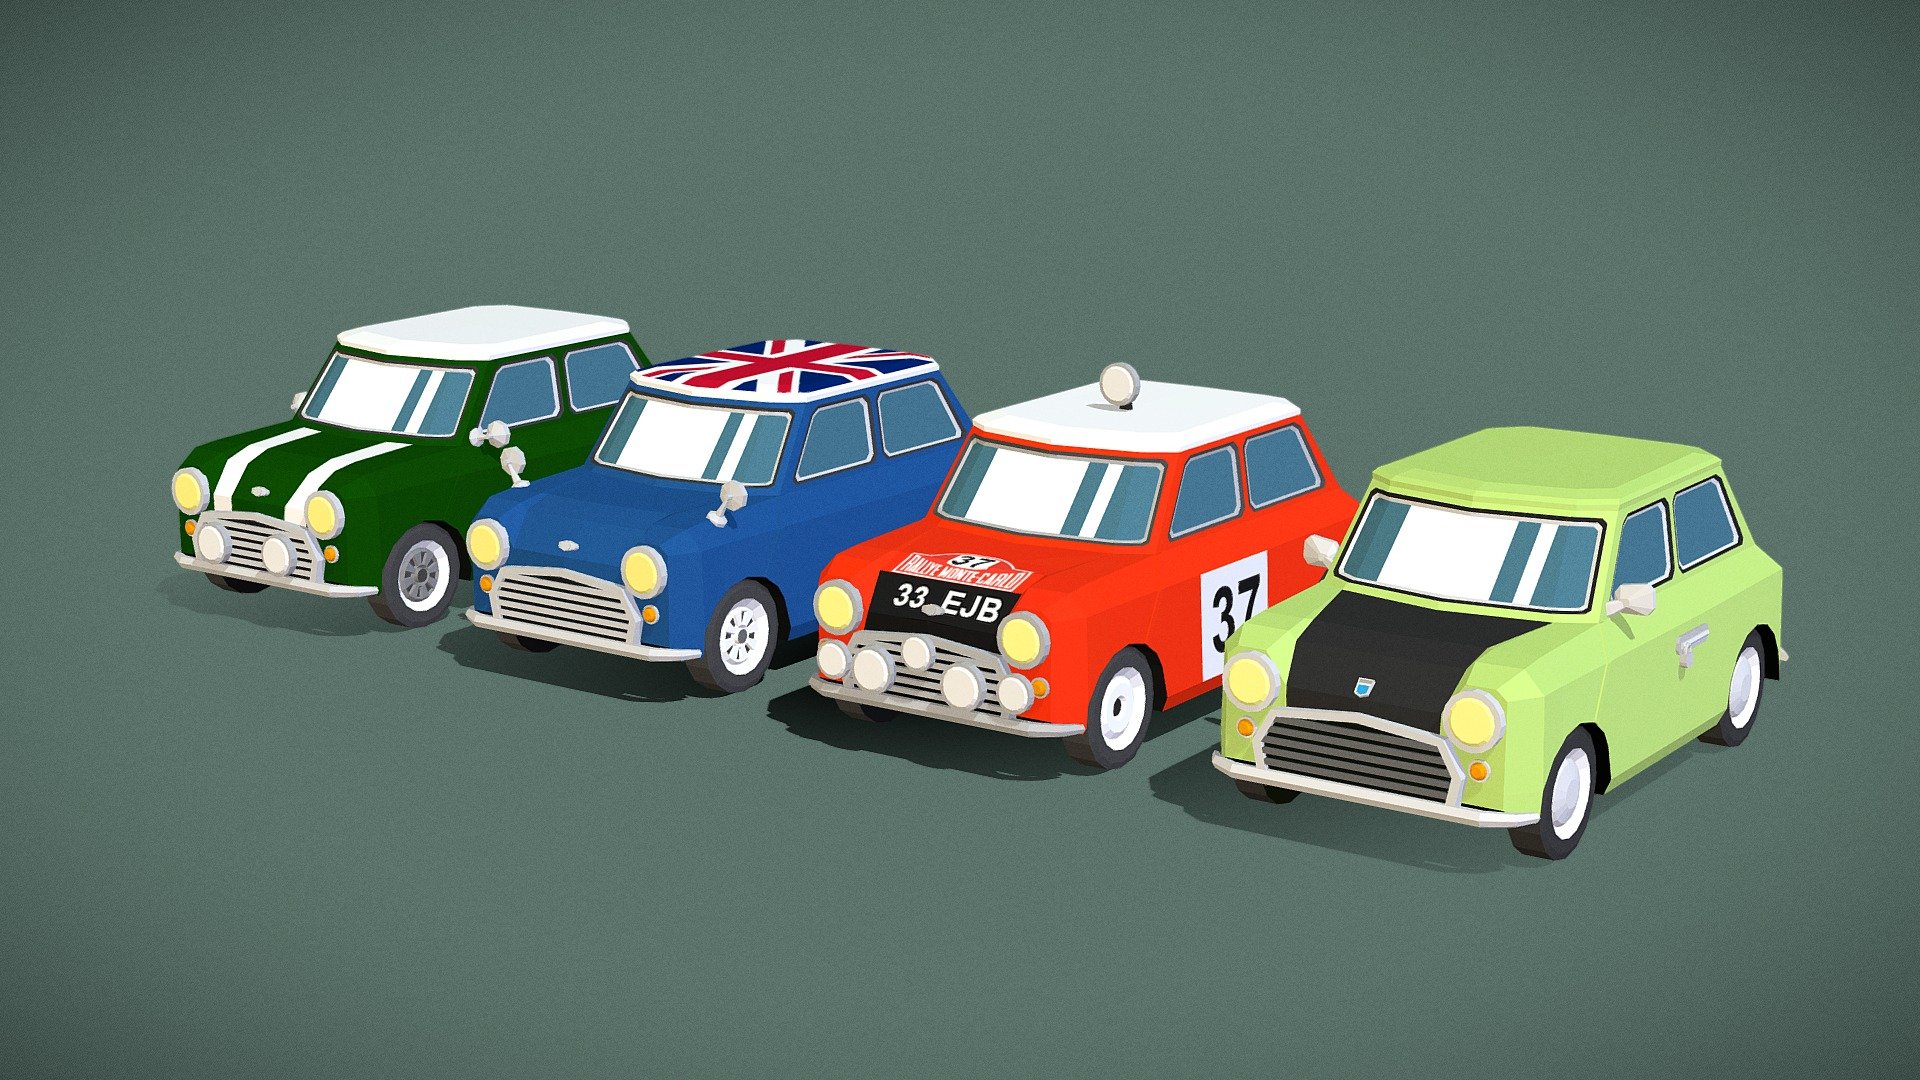 A pack of 4 cartoonish small cars:




British Racing Green with white stripes

Dark Blue with a Union Jack on the roof

Monte-Carlo Rallye version

Ligh green car




All models are flat shaded low poly colored with a texture. 

Can be easily recolored.

Optimized for mobile games.
 - Low Poly Small Cartoon Cars Pack - 3D model by eightismore 3d model